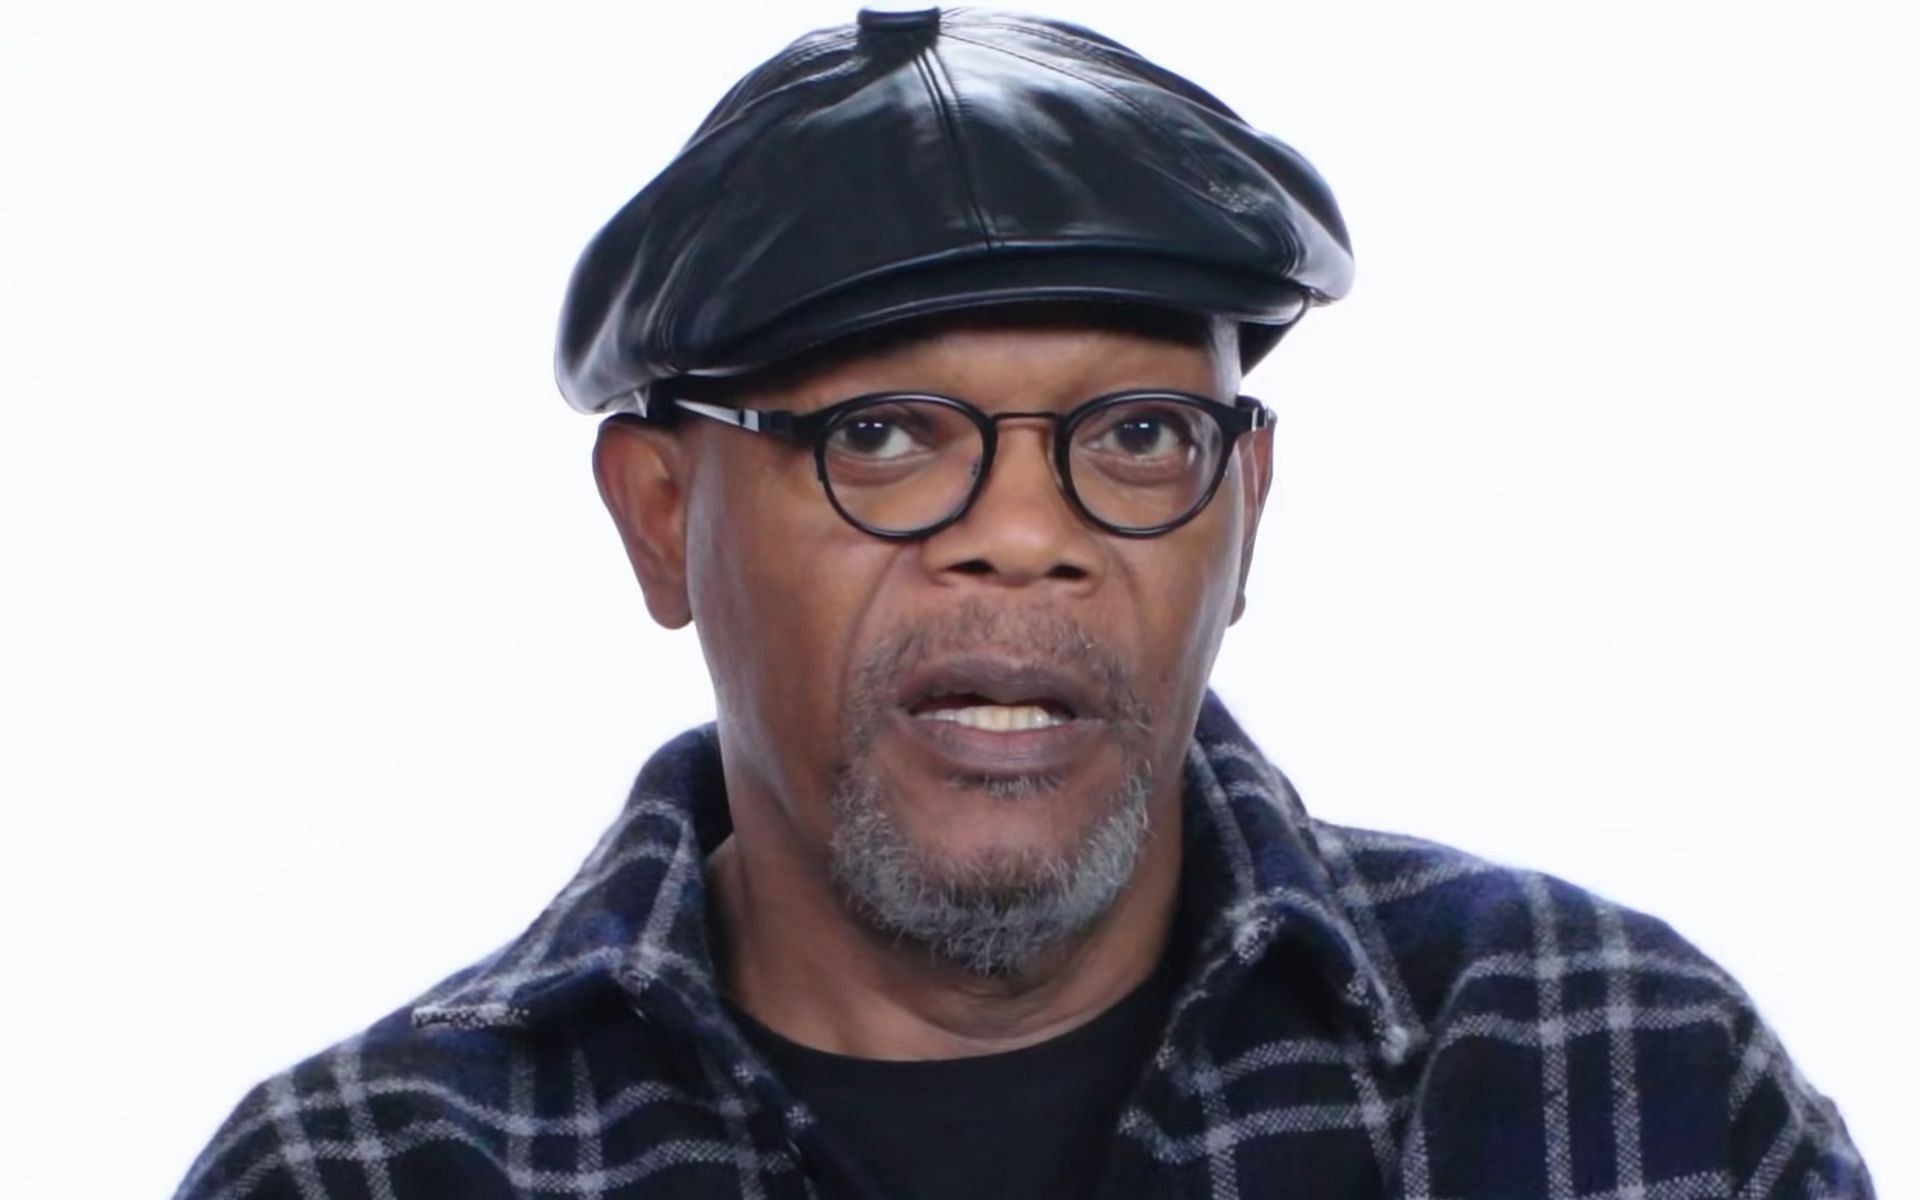 Samuel L Jackson schooled Justice Clarence Thomson after the latter issued concurring opinions on Roe v Wade (Image via YouTube/Wired)